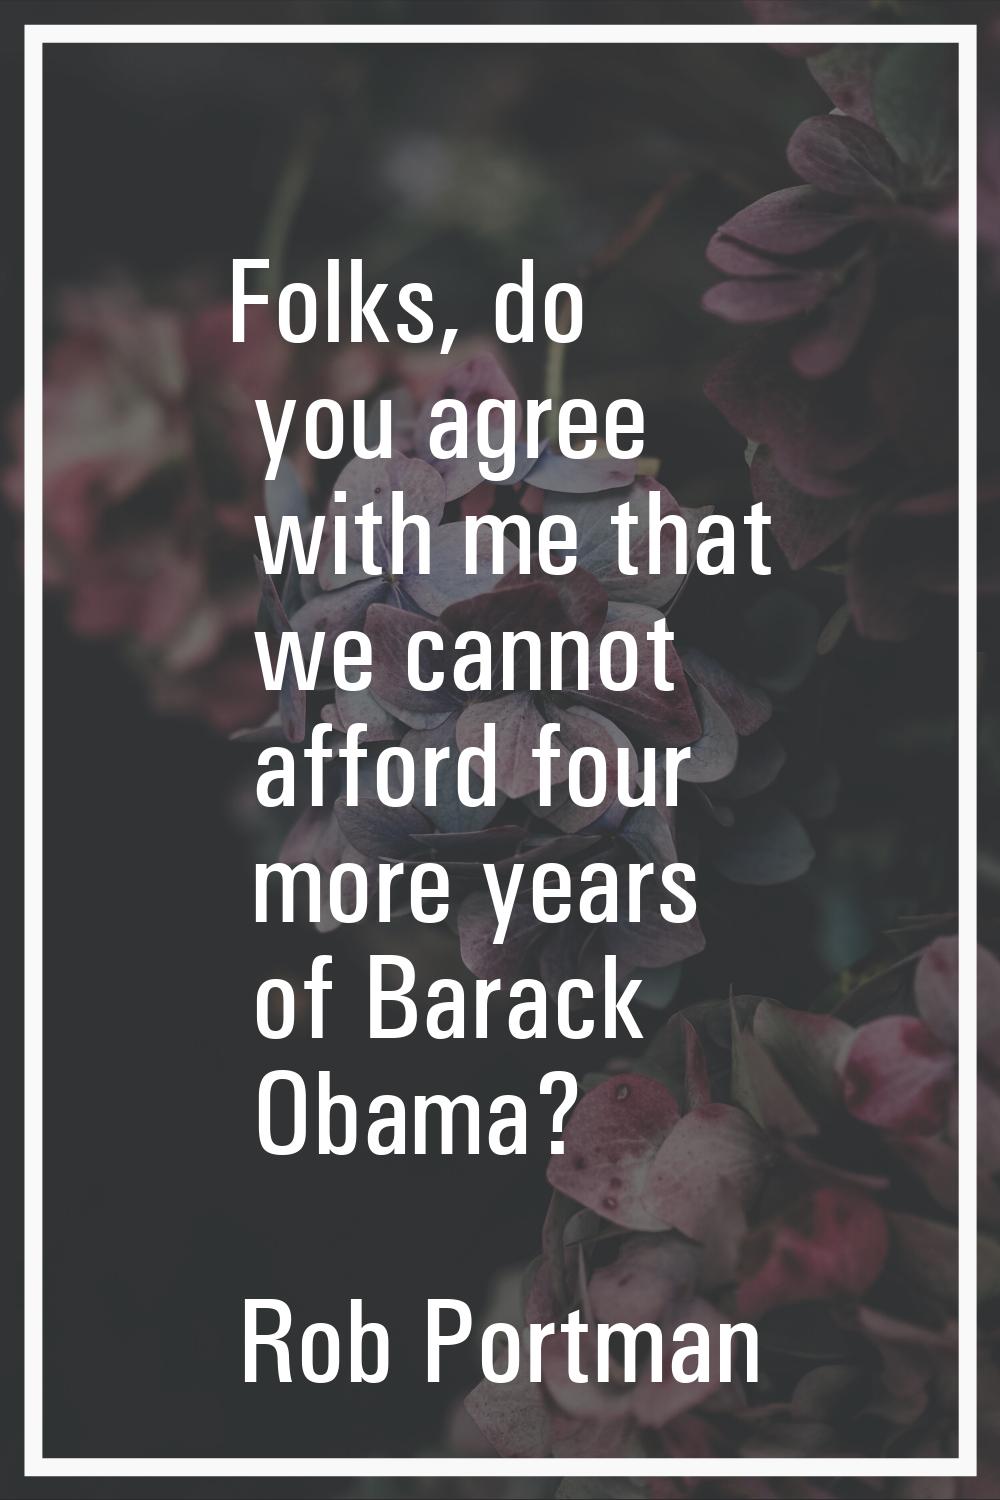 Folks, do you agree with me that we cannot afford four more years of Barack Obama?